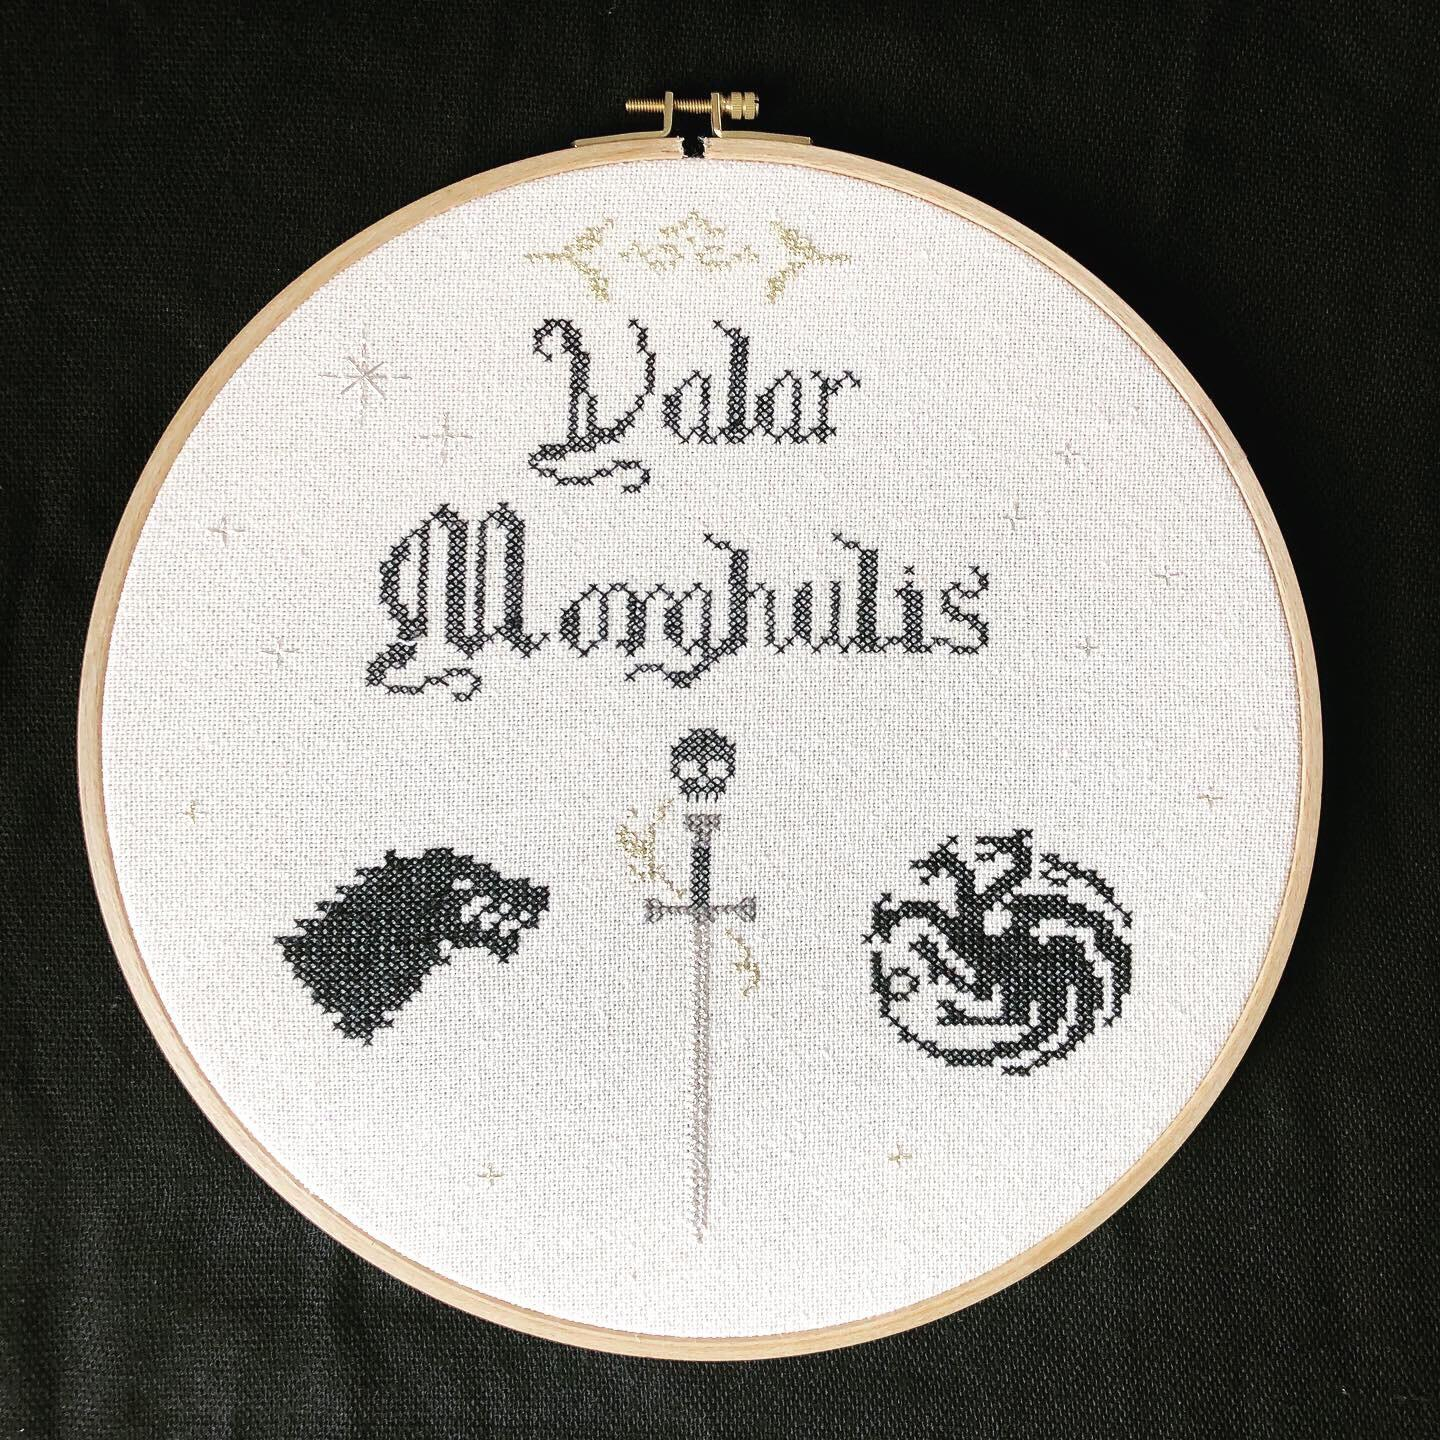 Game Of Thrones Embroidery Patterns My Tribute To Game Of Thrones Embroidery